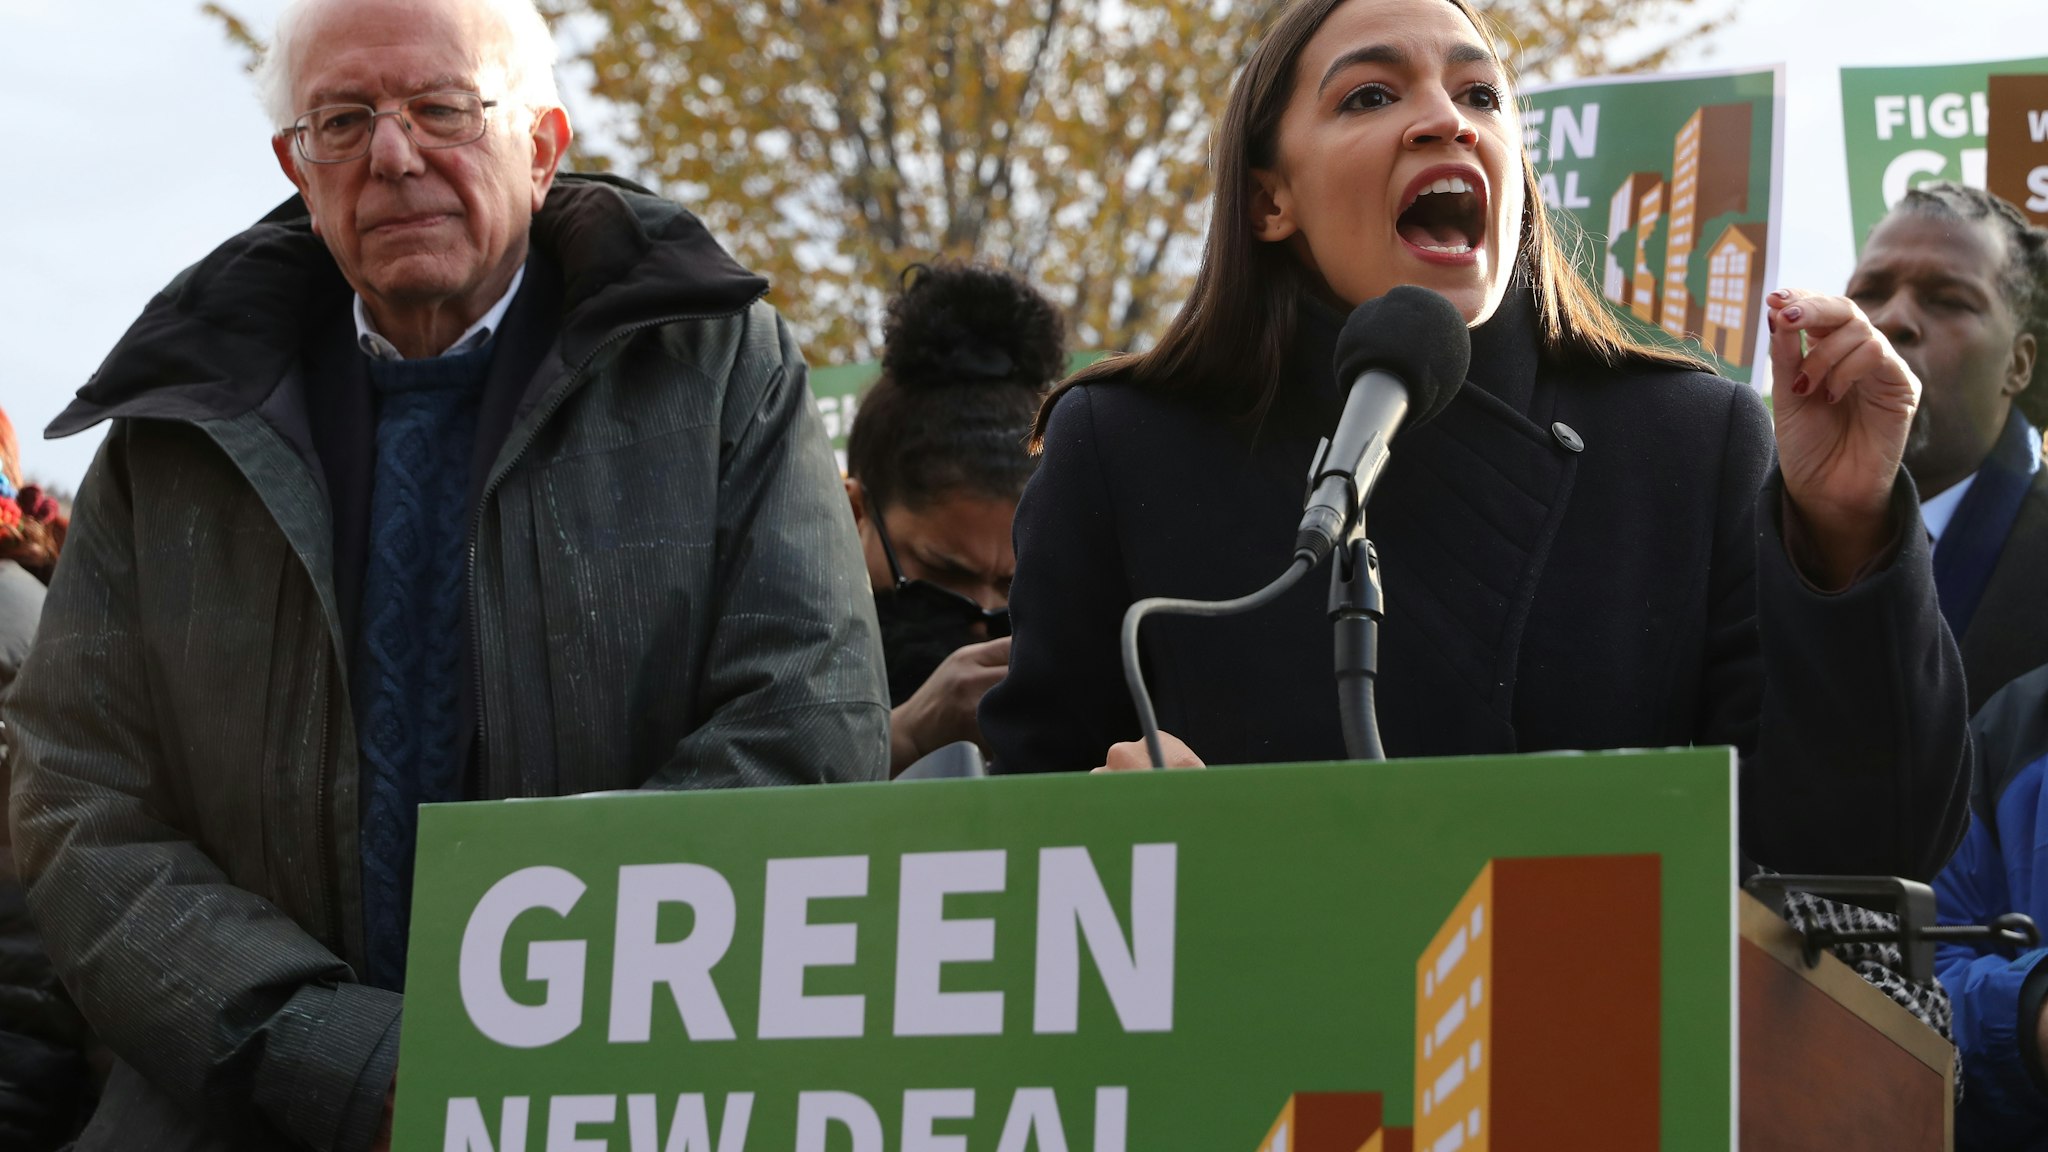 WASHINGTON, DC - NOVEMBER 14: Democratic presidential candidate Sen. Bernie Sanders (I-VT) (L) and Rep. Alexandria Ocasio-Cortez (D-NY) hold a news conference to introduce legislation to transform public housing as part of their Green New Deal proposal outside the U.S. Capitol November 14, 2019 in Washington, DC. The liberal legislators invited affordable housing advocates and climate change activists to join them for the announcement. (Photo by Chip Somodevilla/Getty Images)